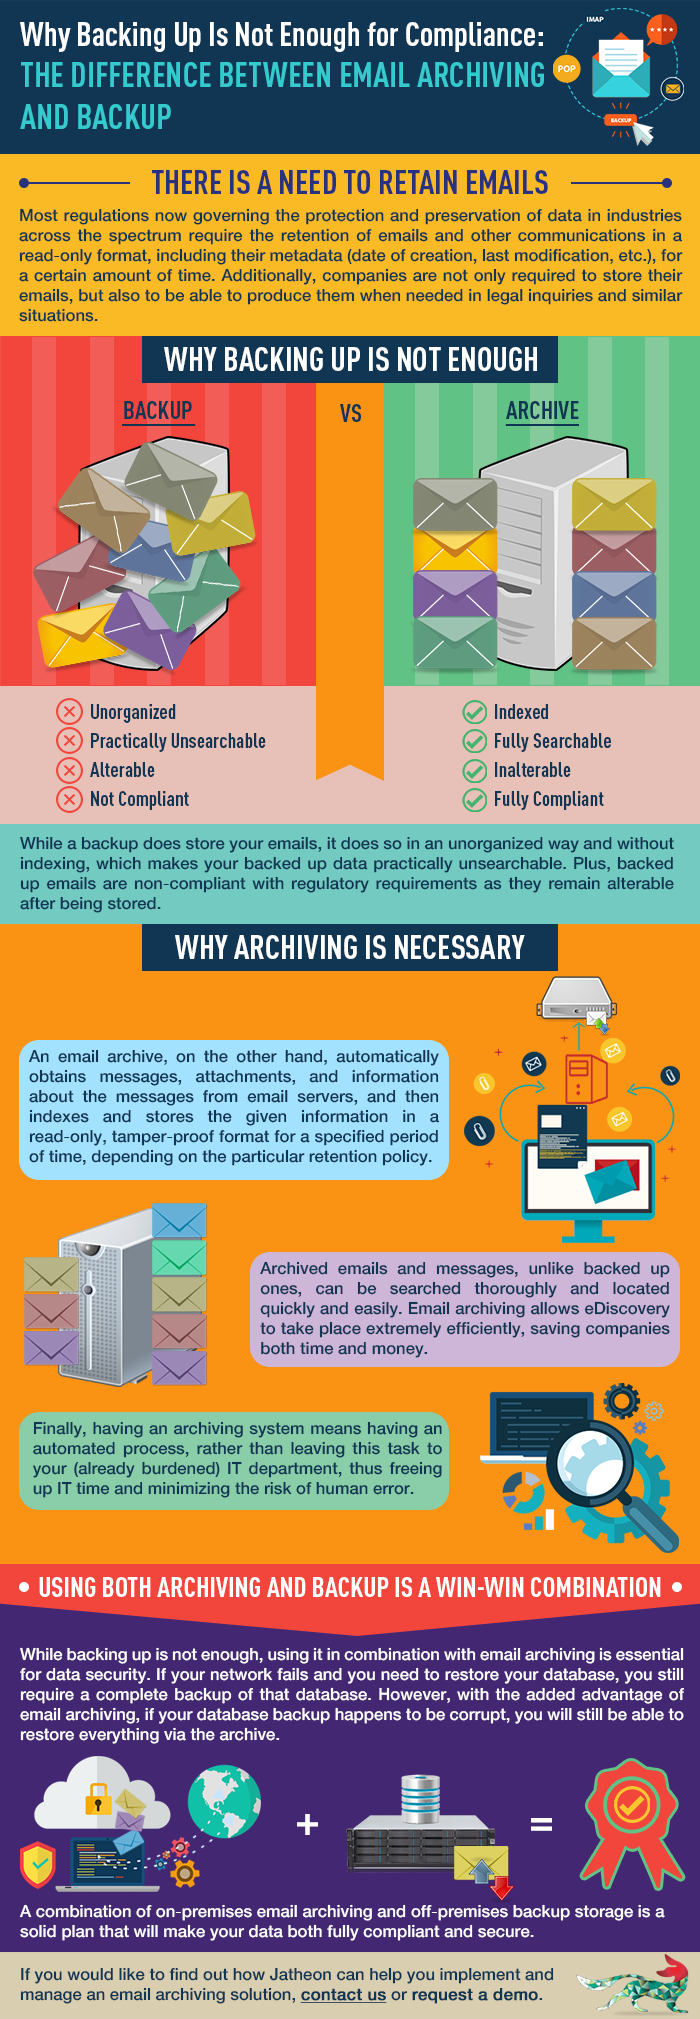 Why-Backing-Up-Is-Not-Enough-for-Compliance-infographic-may-2017